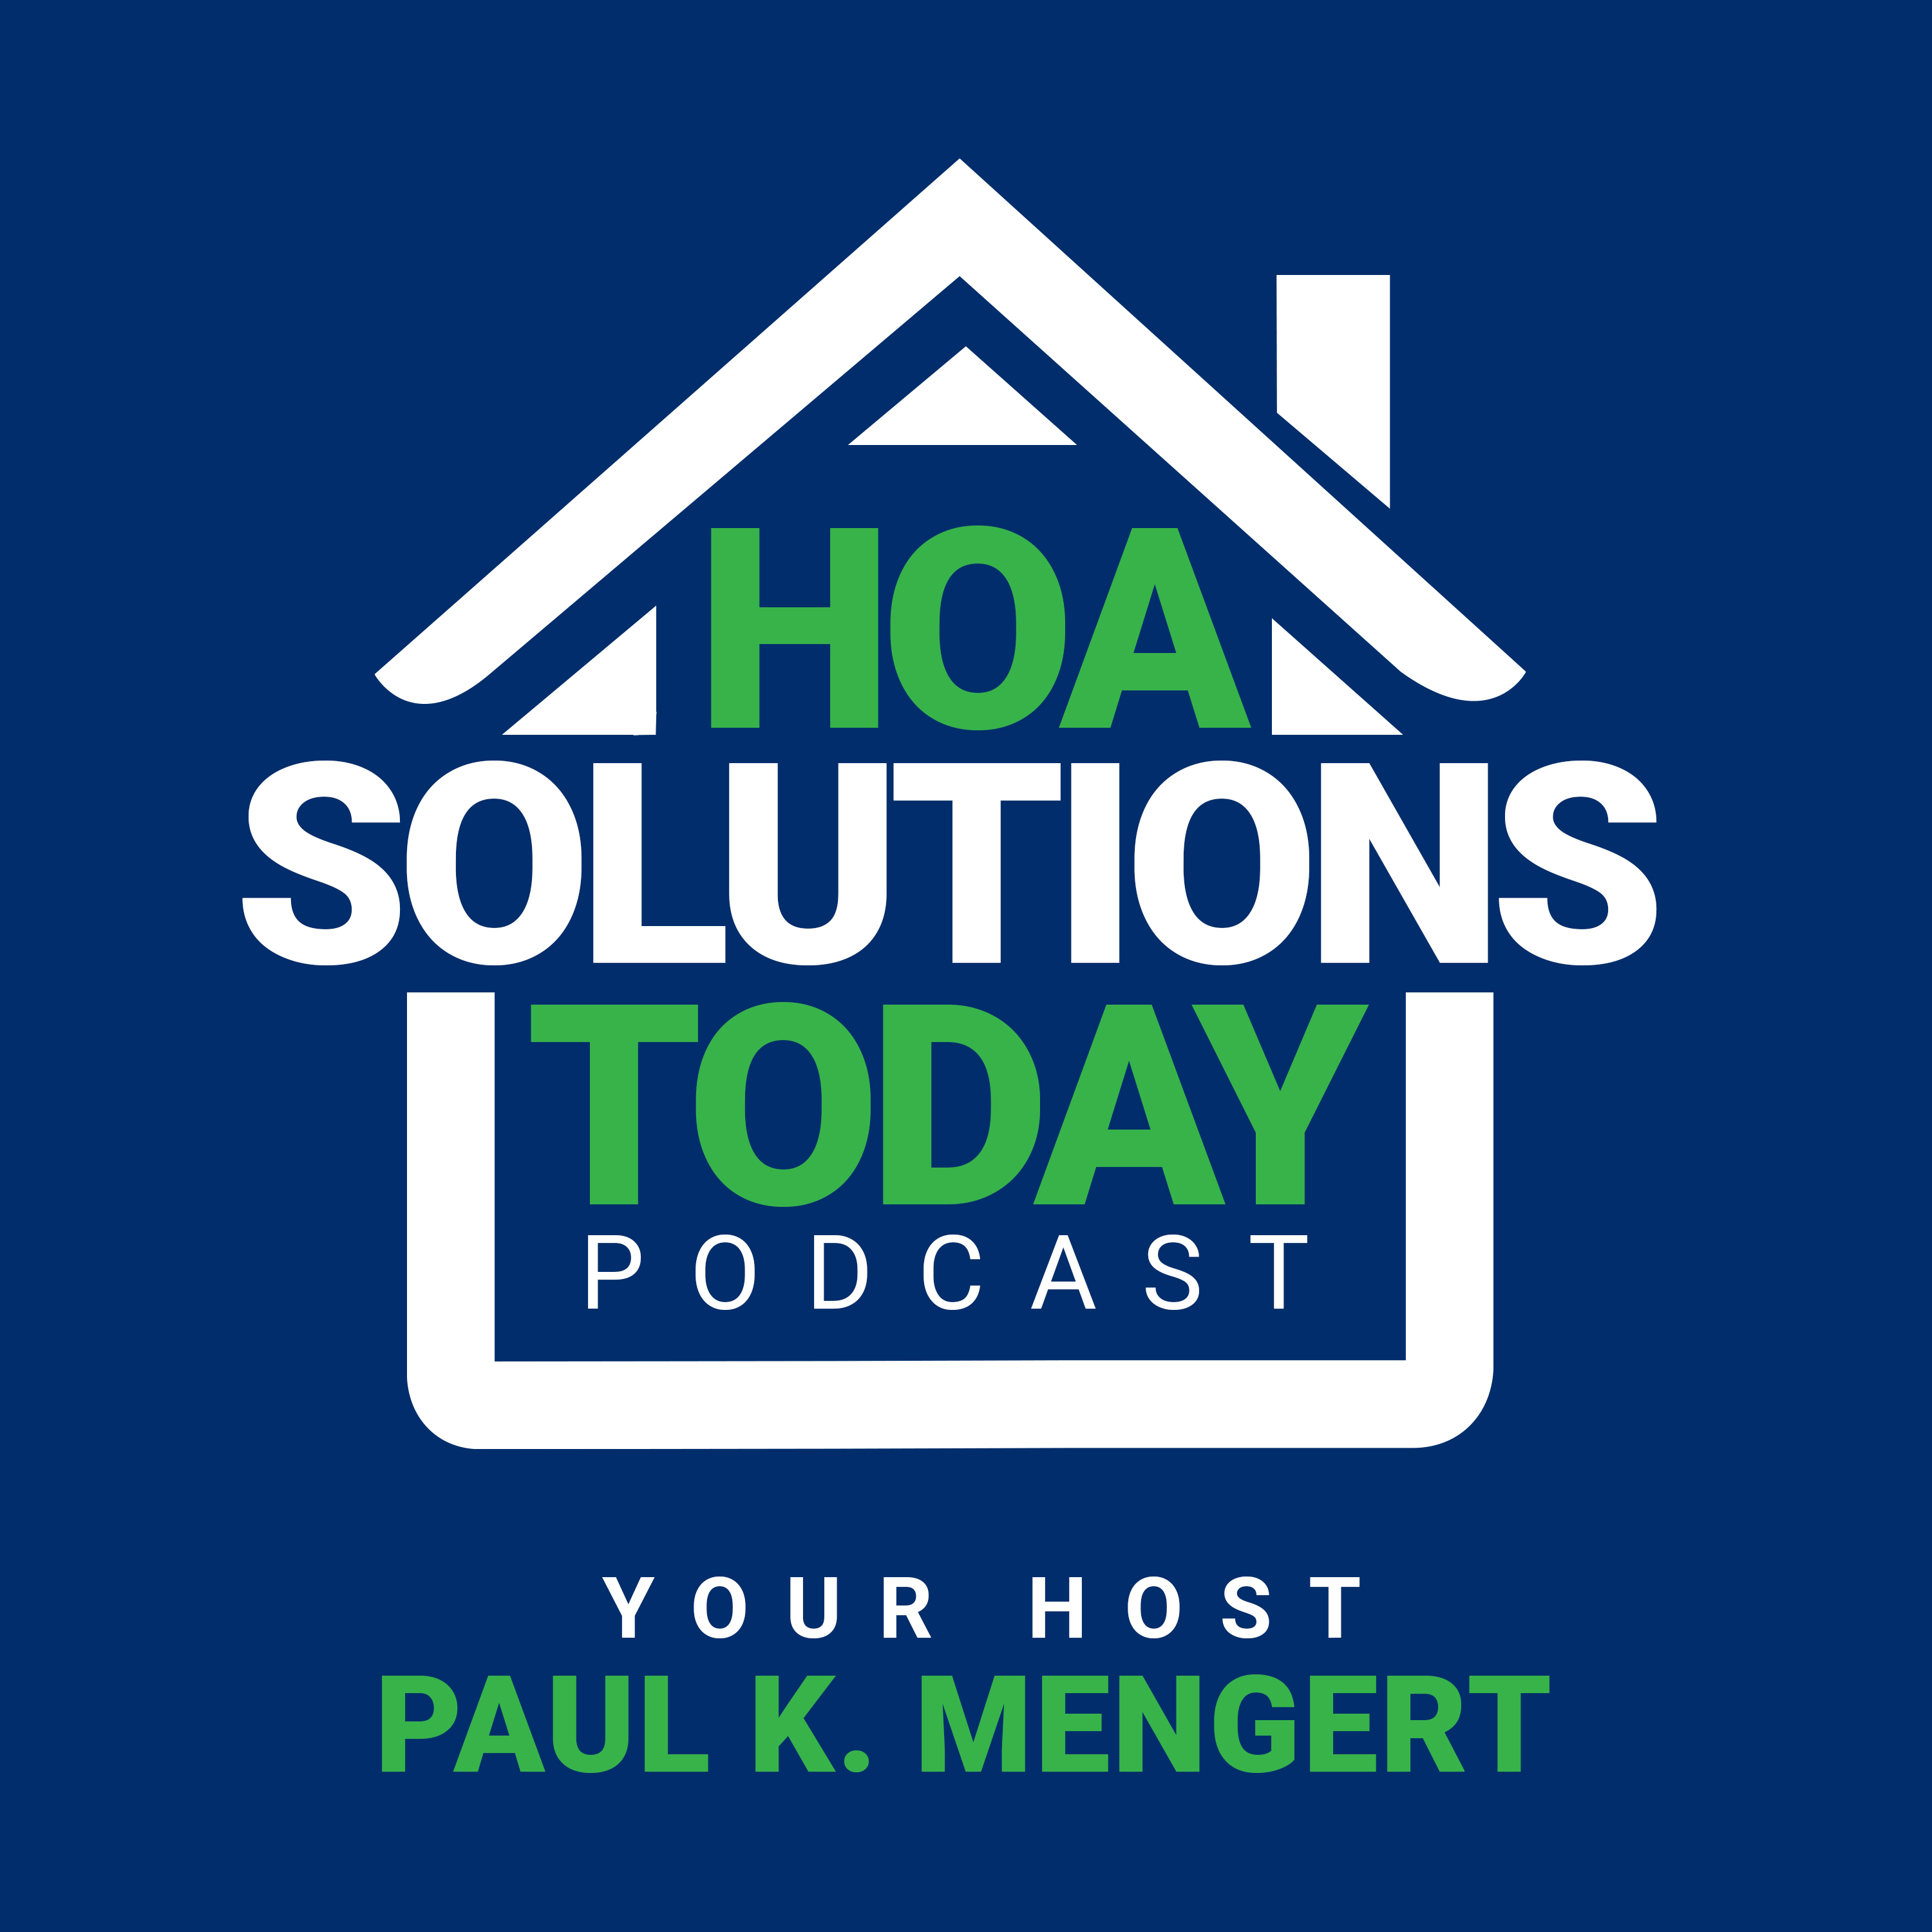 HOA Solutions Today: Insurance Solutions